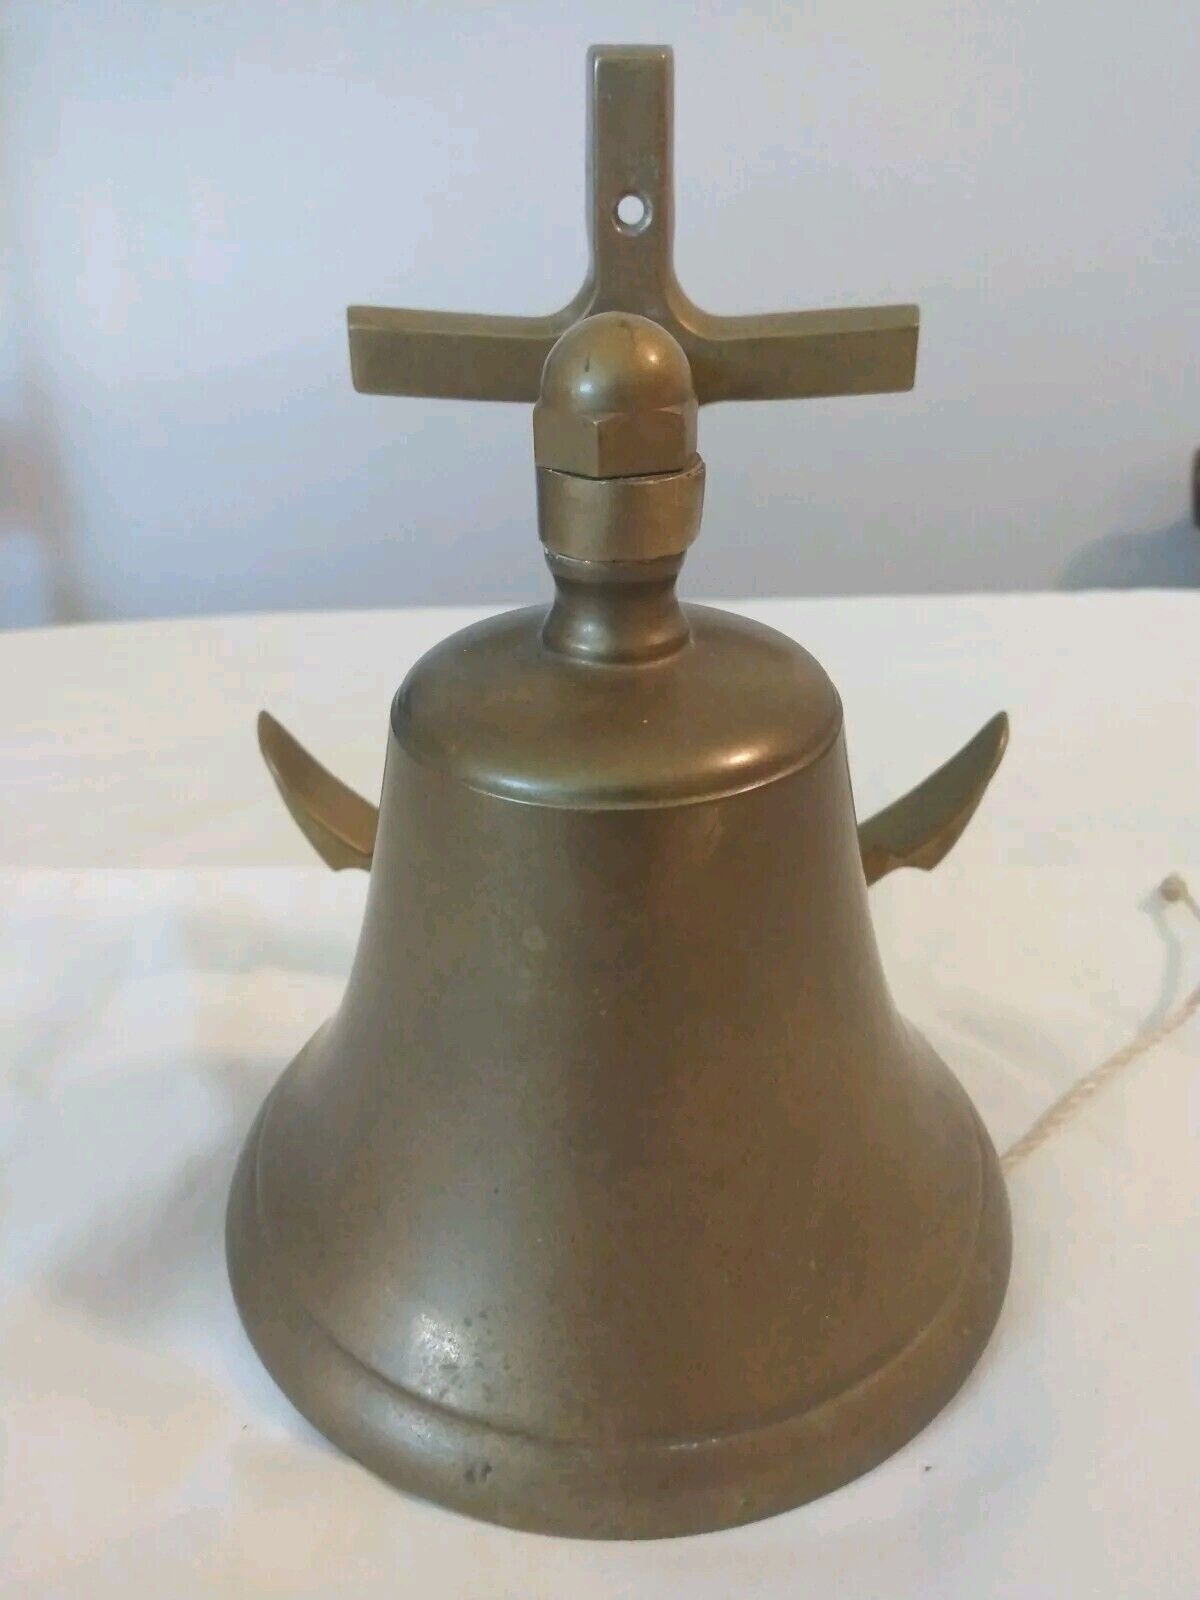 Brass Anchor Ship Bell Nautical Rope Maritime Wall Decor Perfect for Beach House